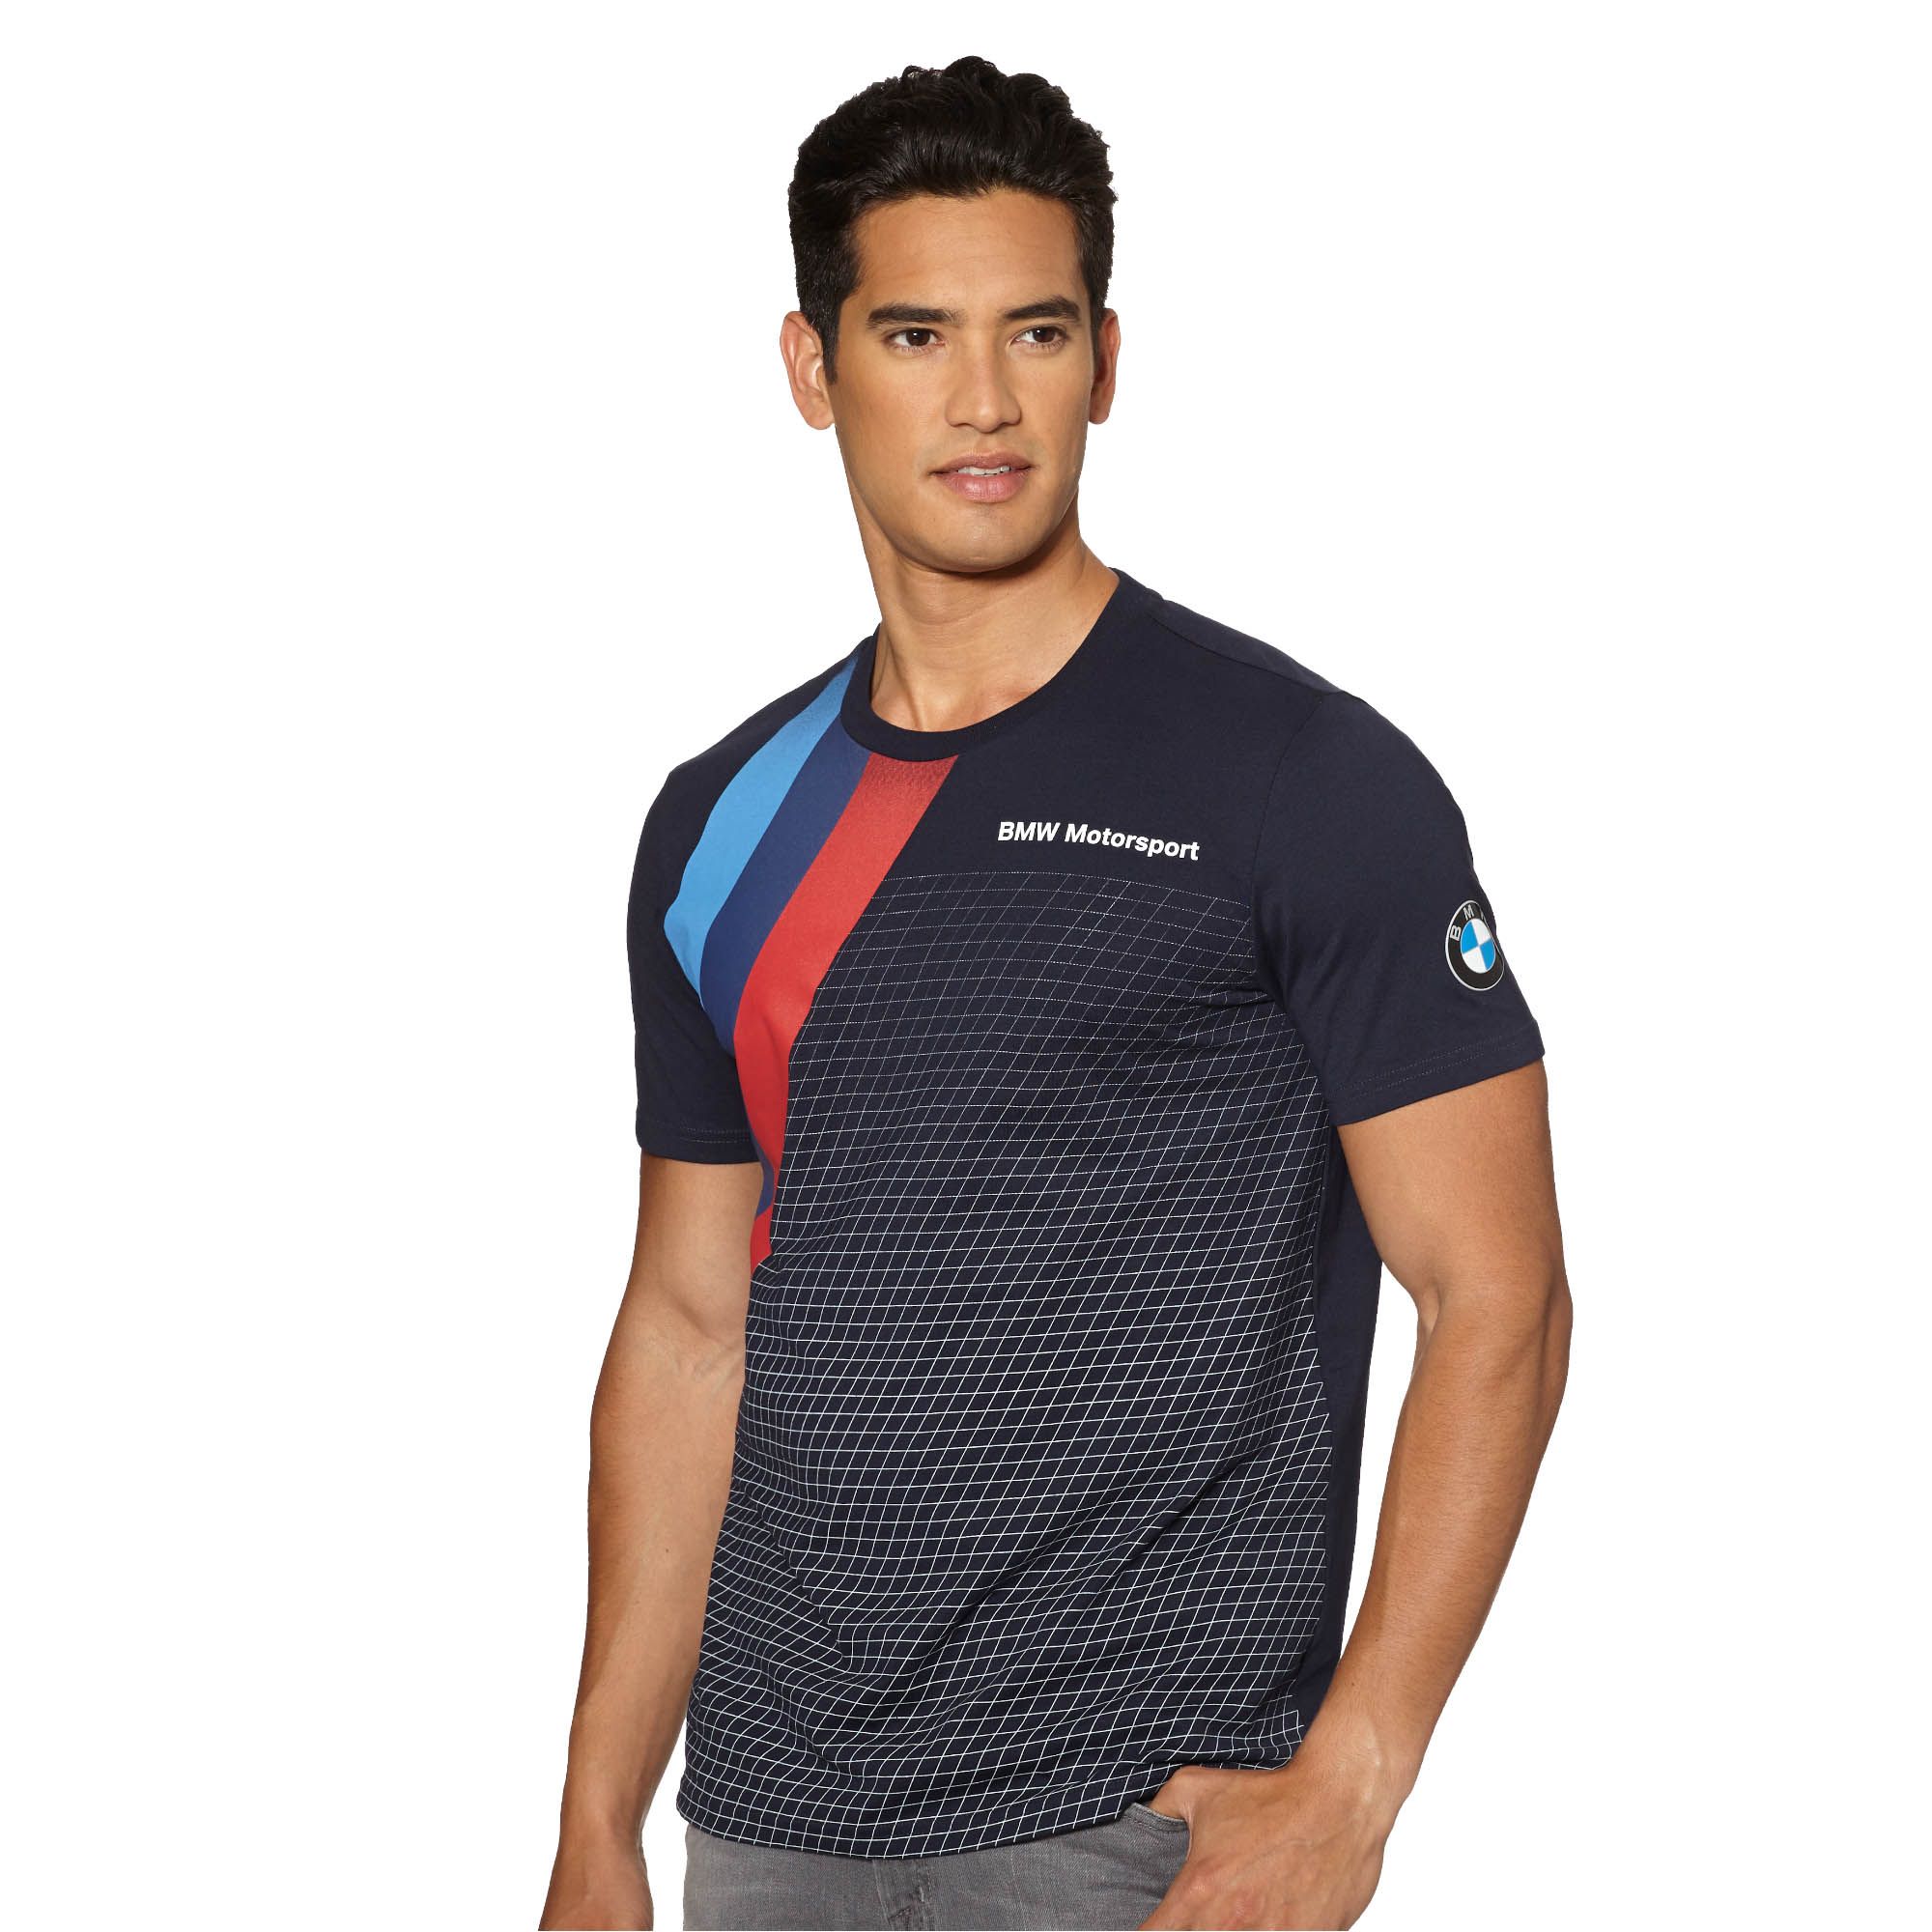 Bmw motorsport clothing south africa #7